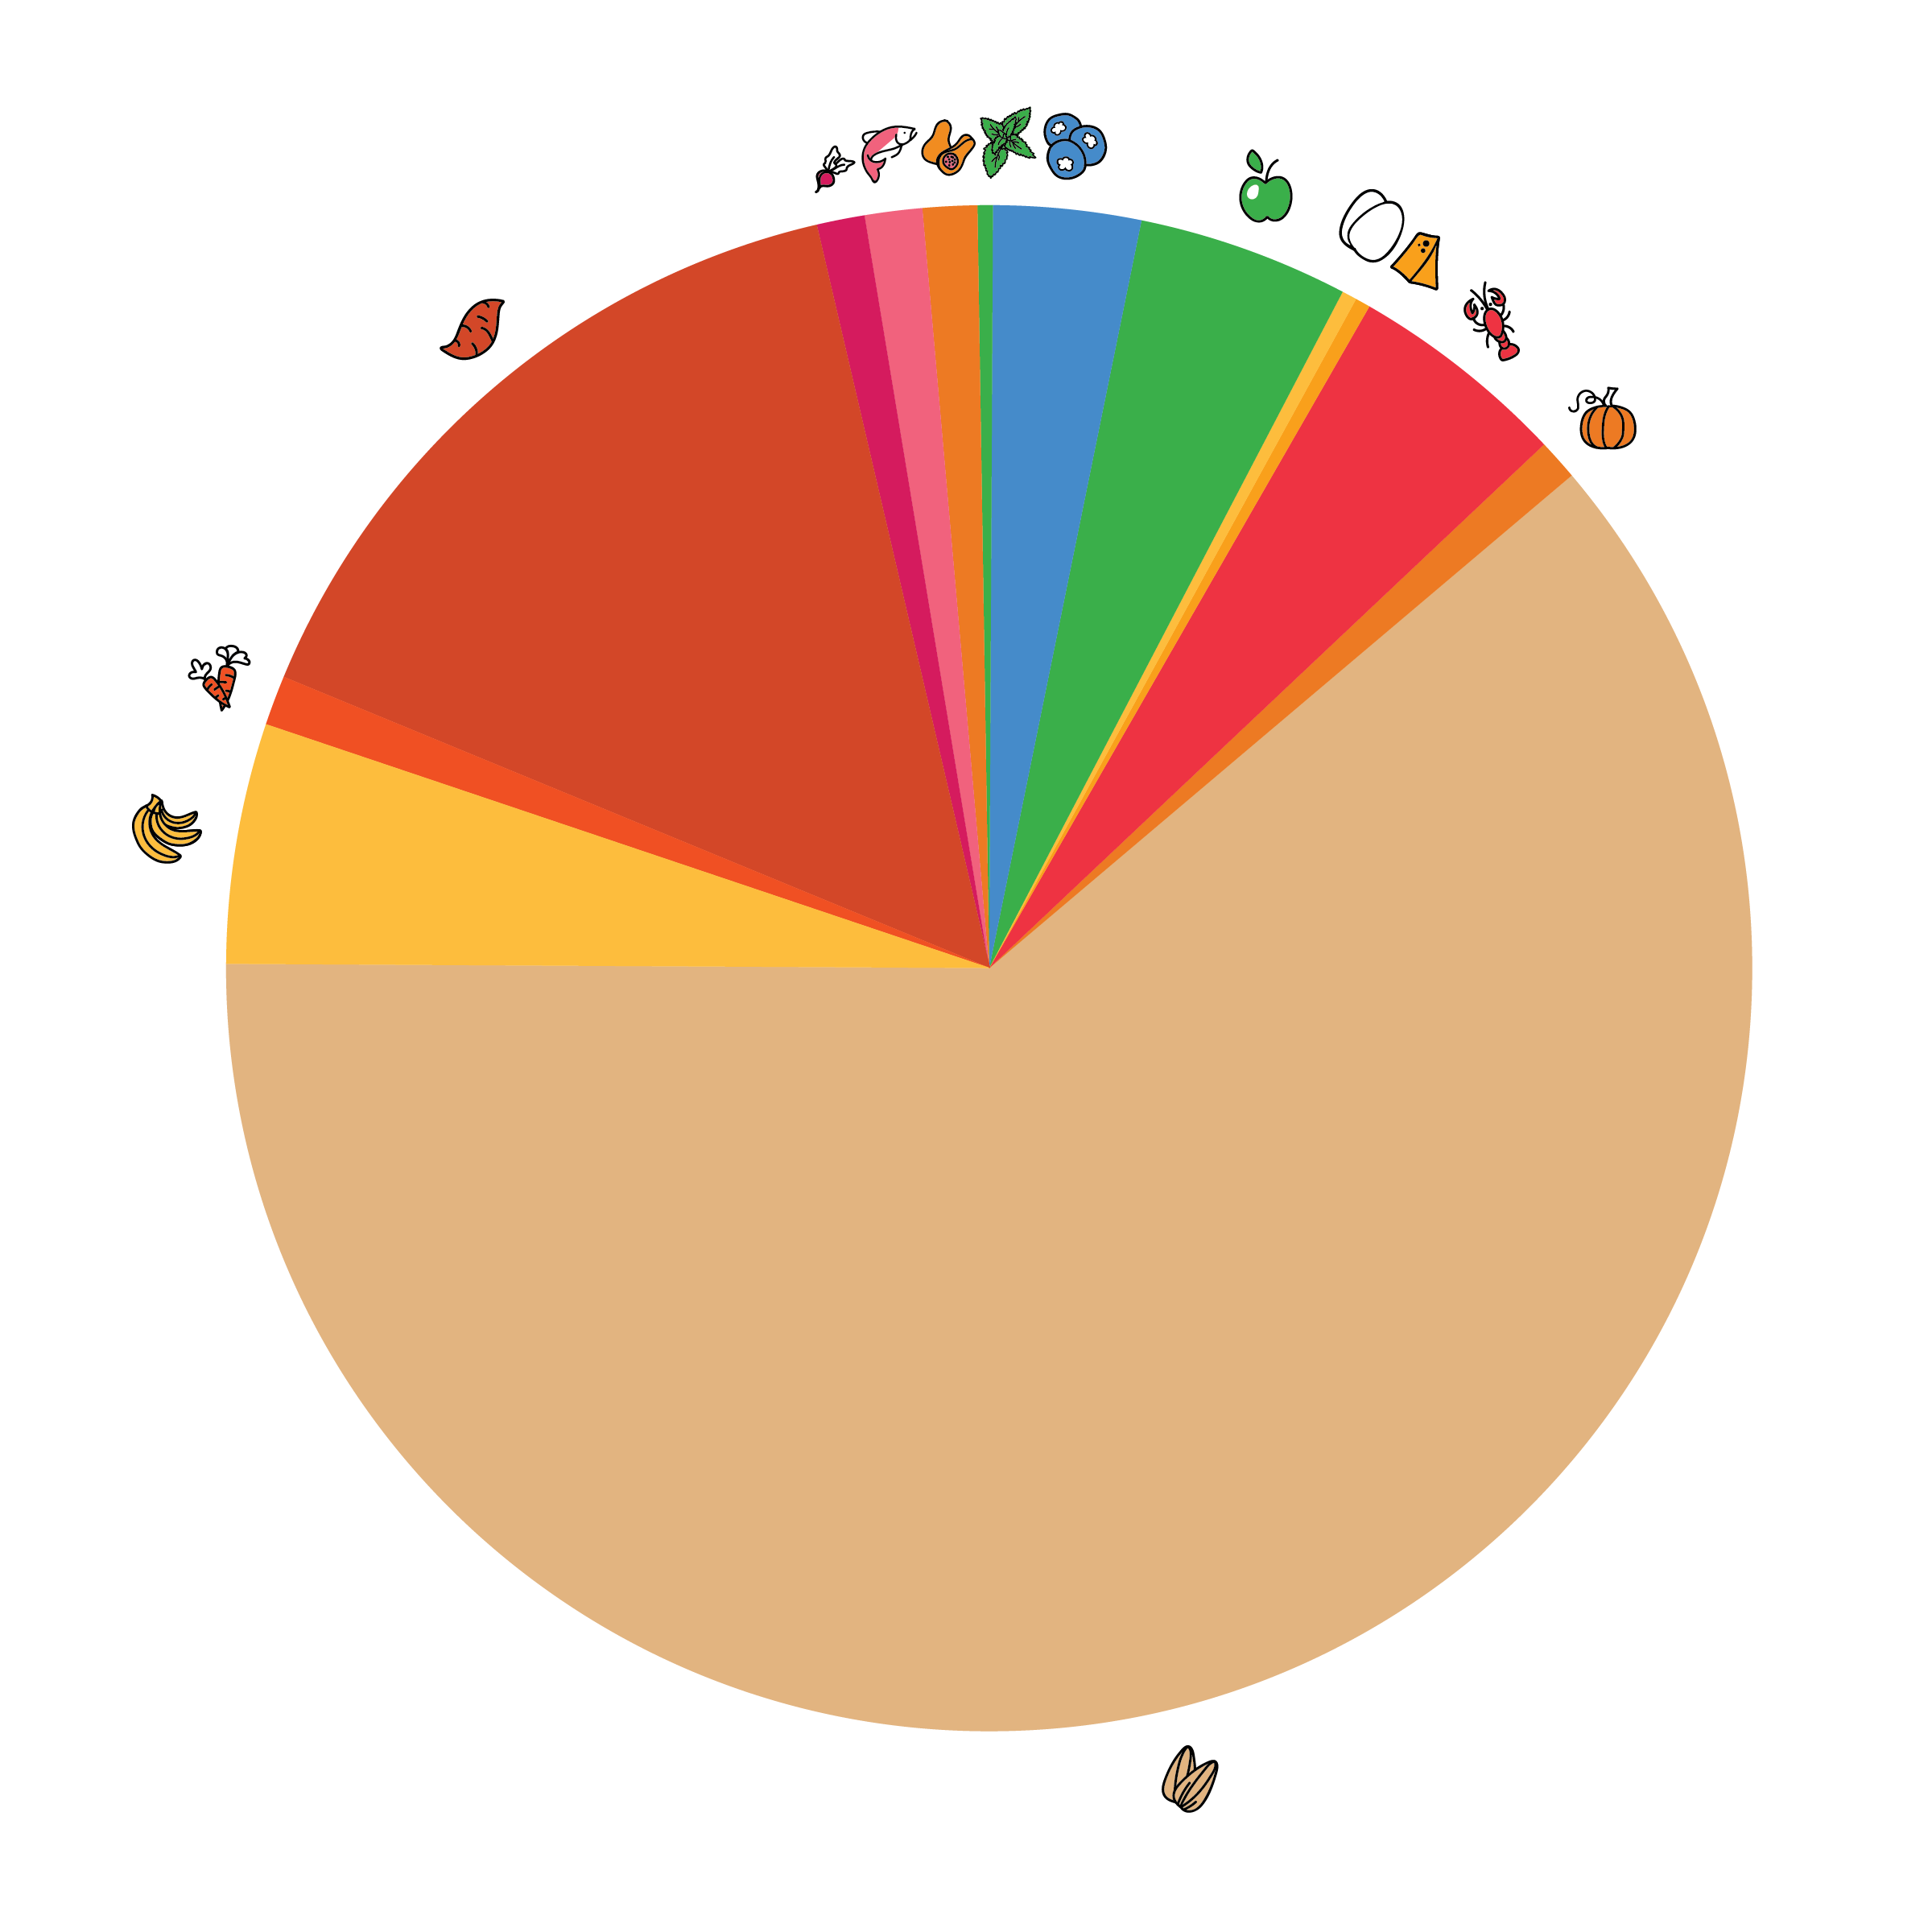 Pie chart of upcycled products 